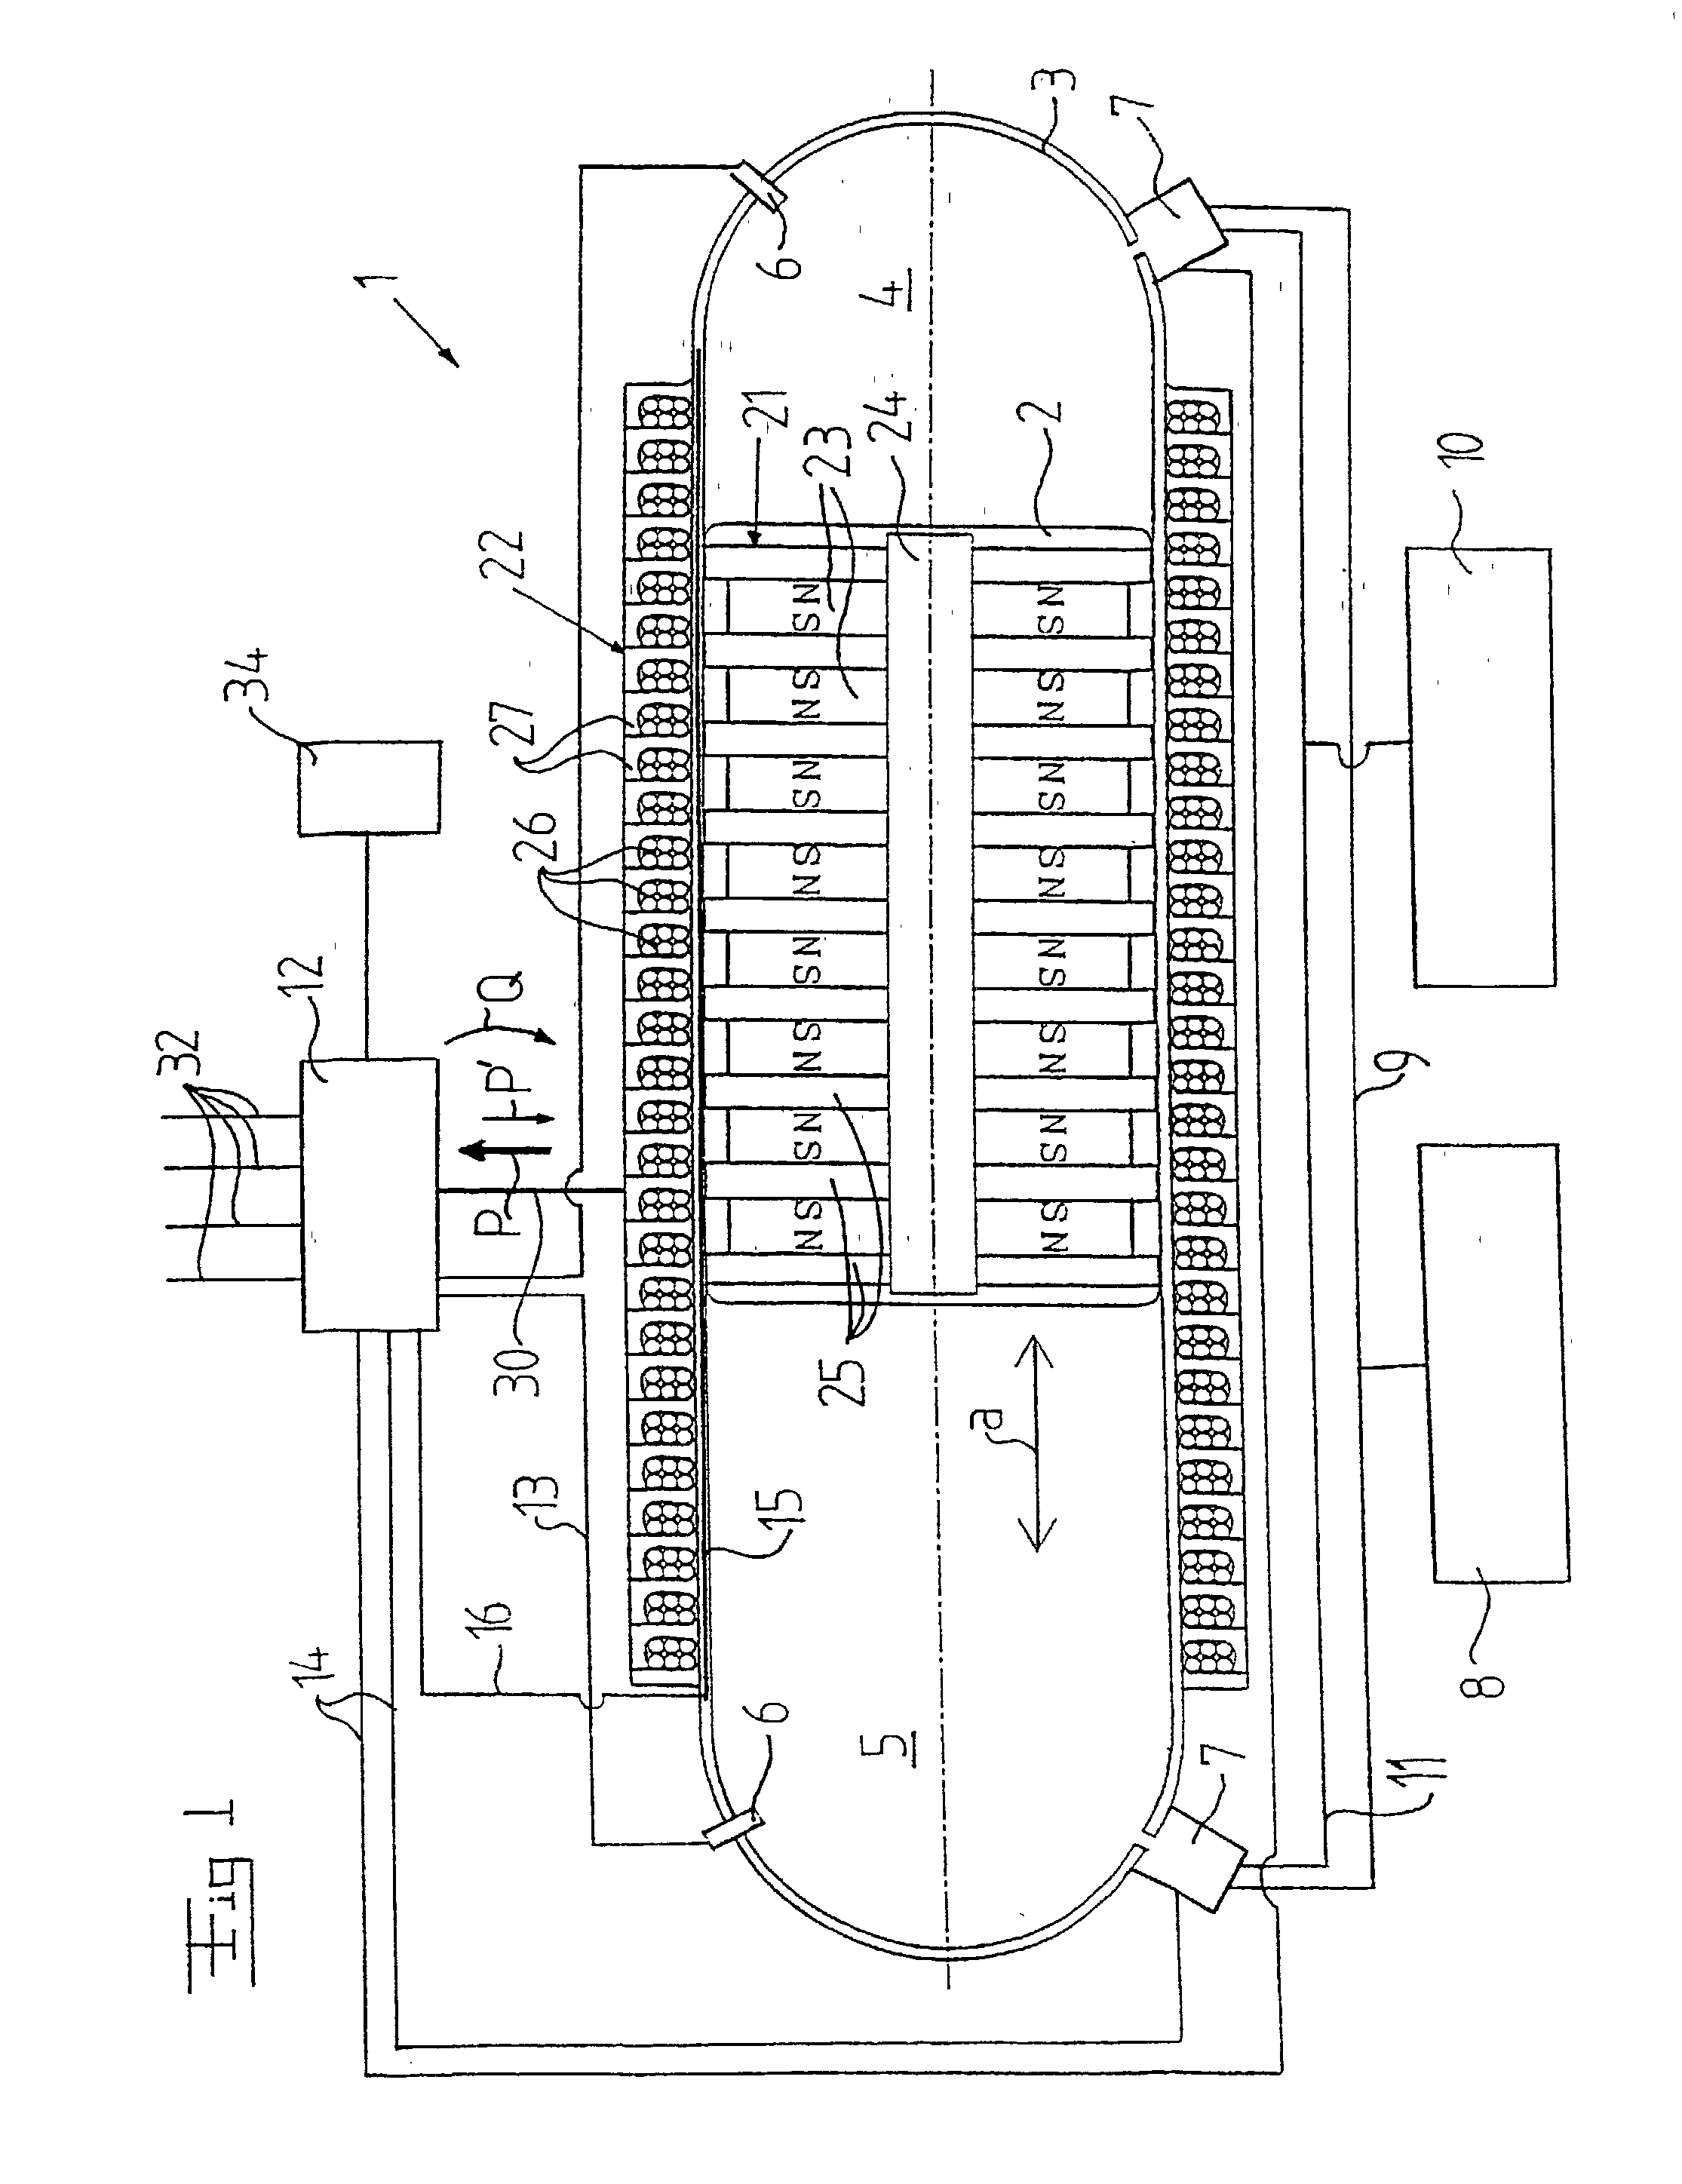 Device including a combustion engine, a use of the device, and a vehicle